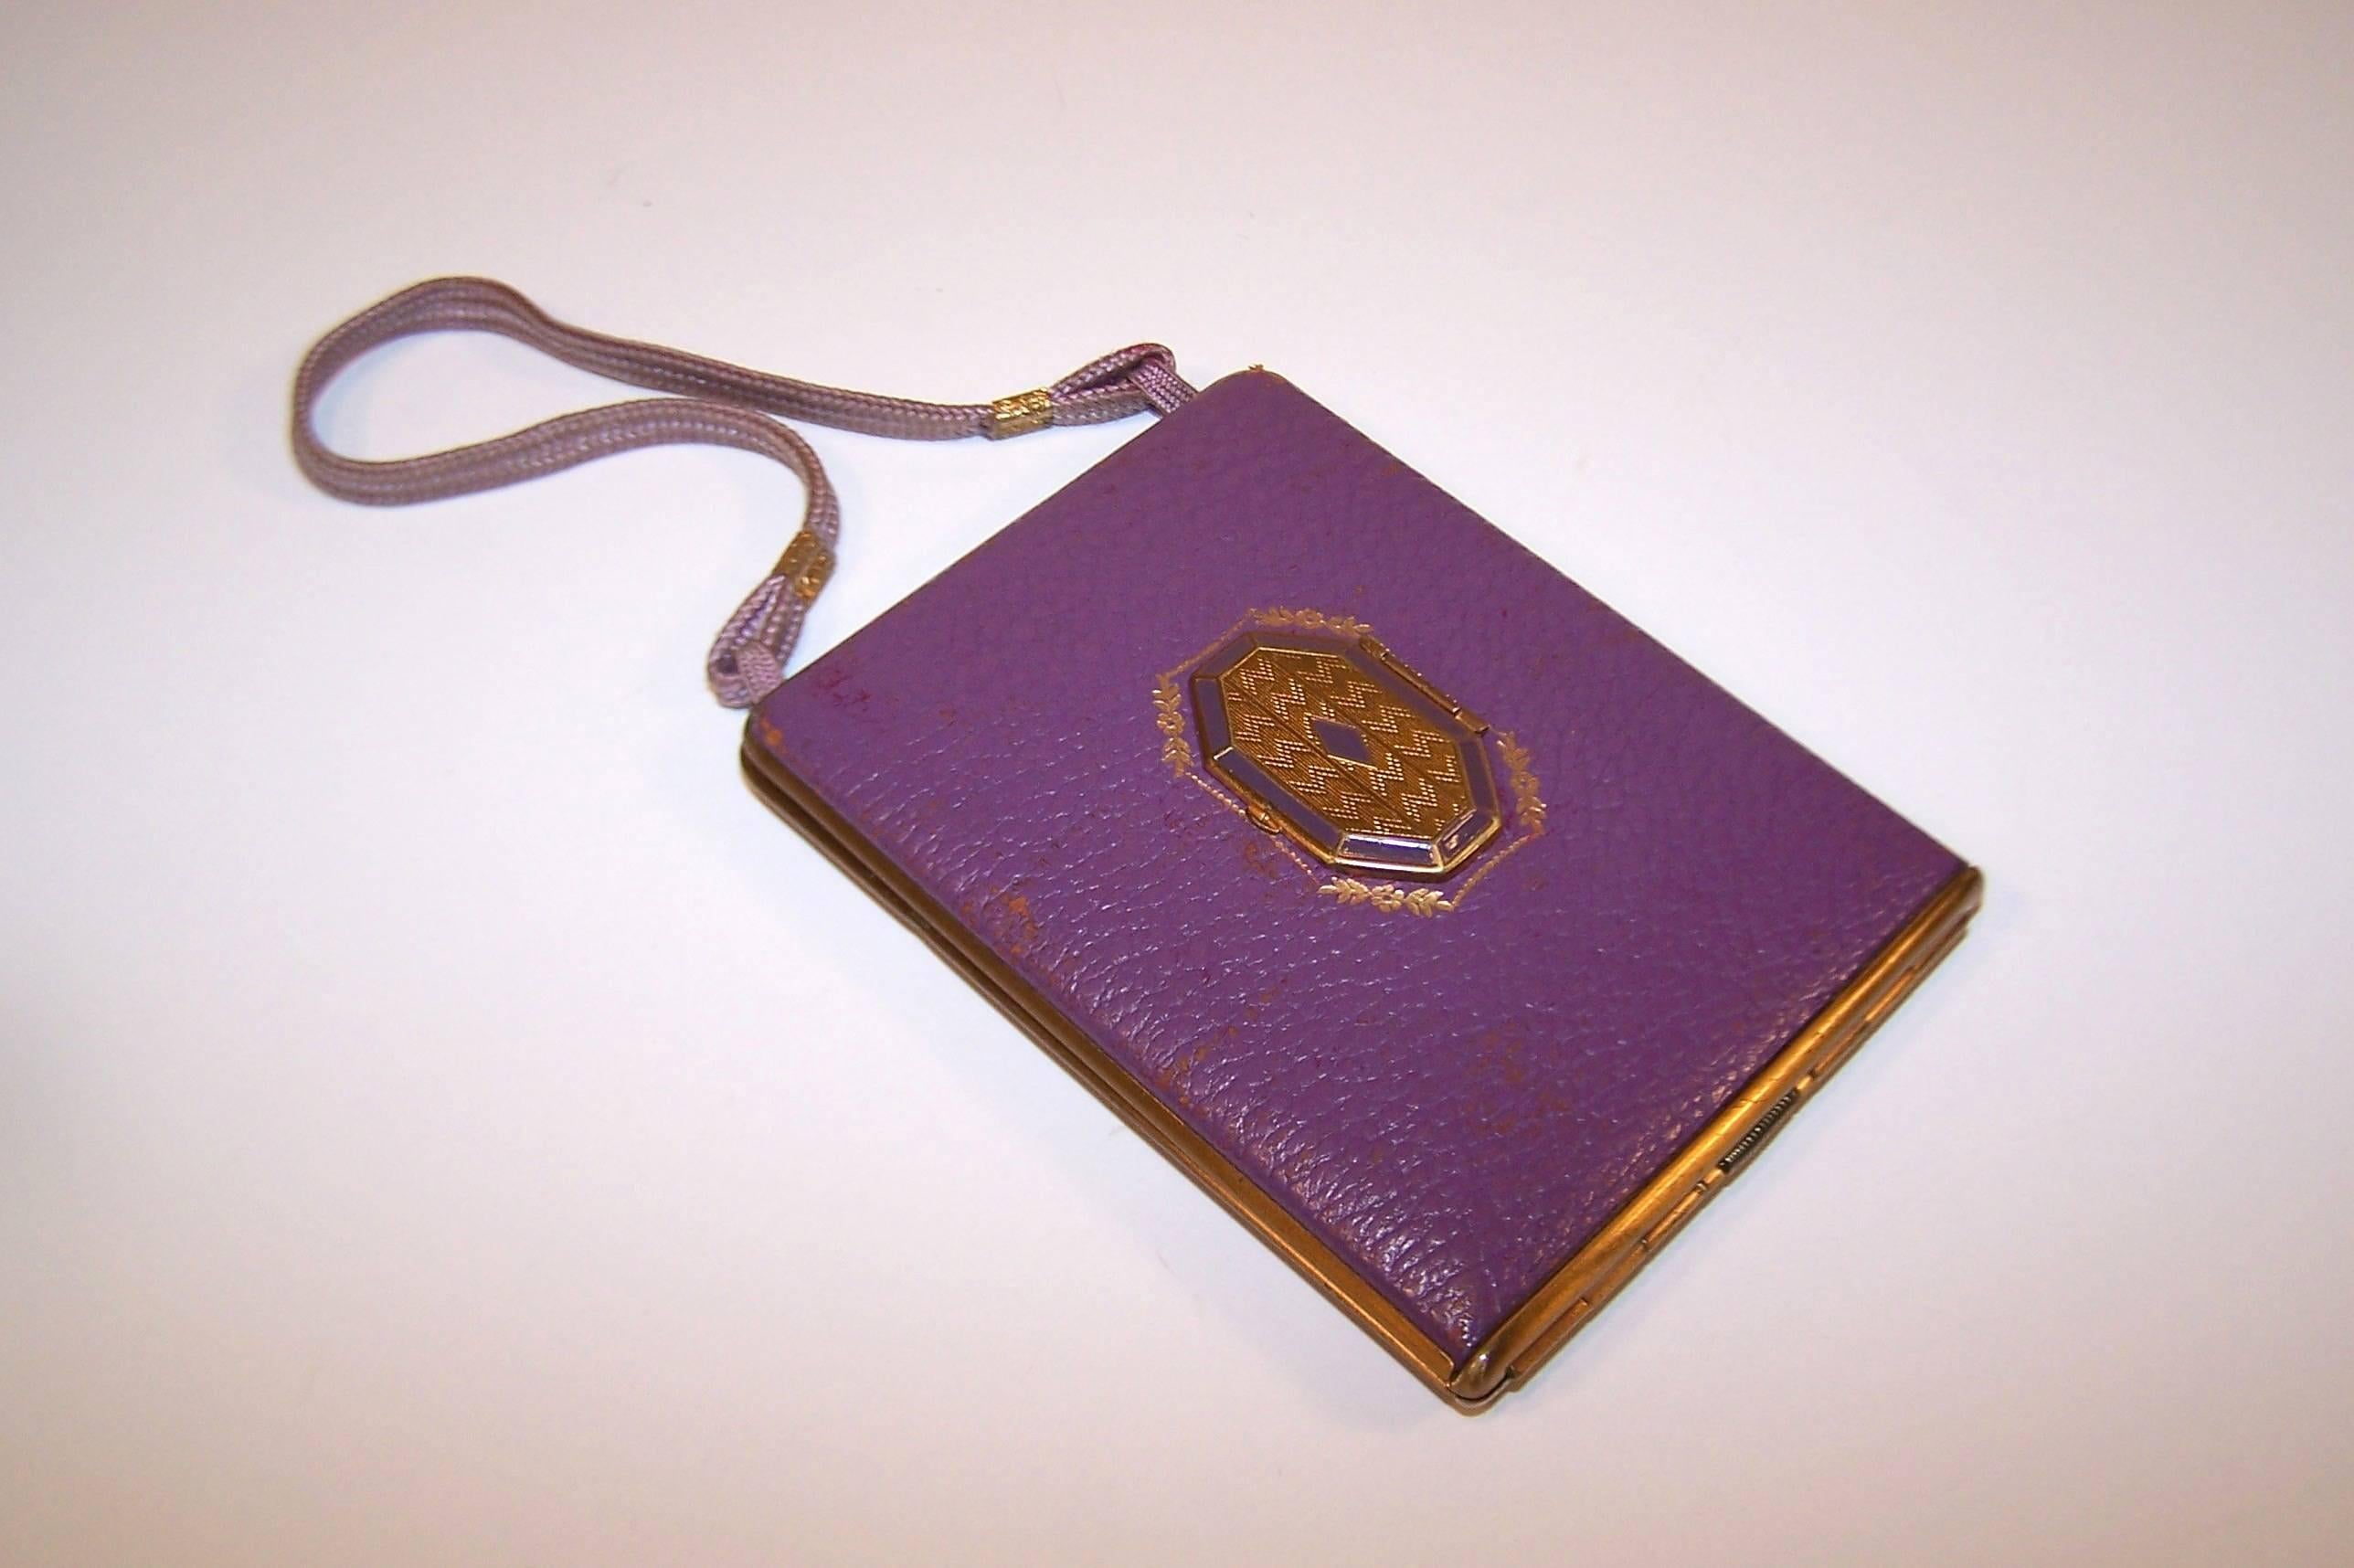 Much like chantelaines, elaborate mirrored compacts are feminine gadgets of a bygone era ... and oh so fun to explore!  This unique example from Mondaine of New York is a vibrant purple leather with guilloche decoration on the exterior and interior.